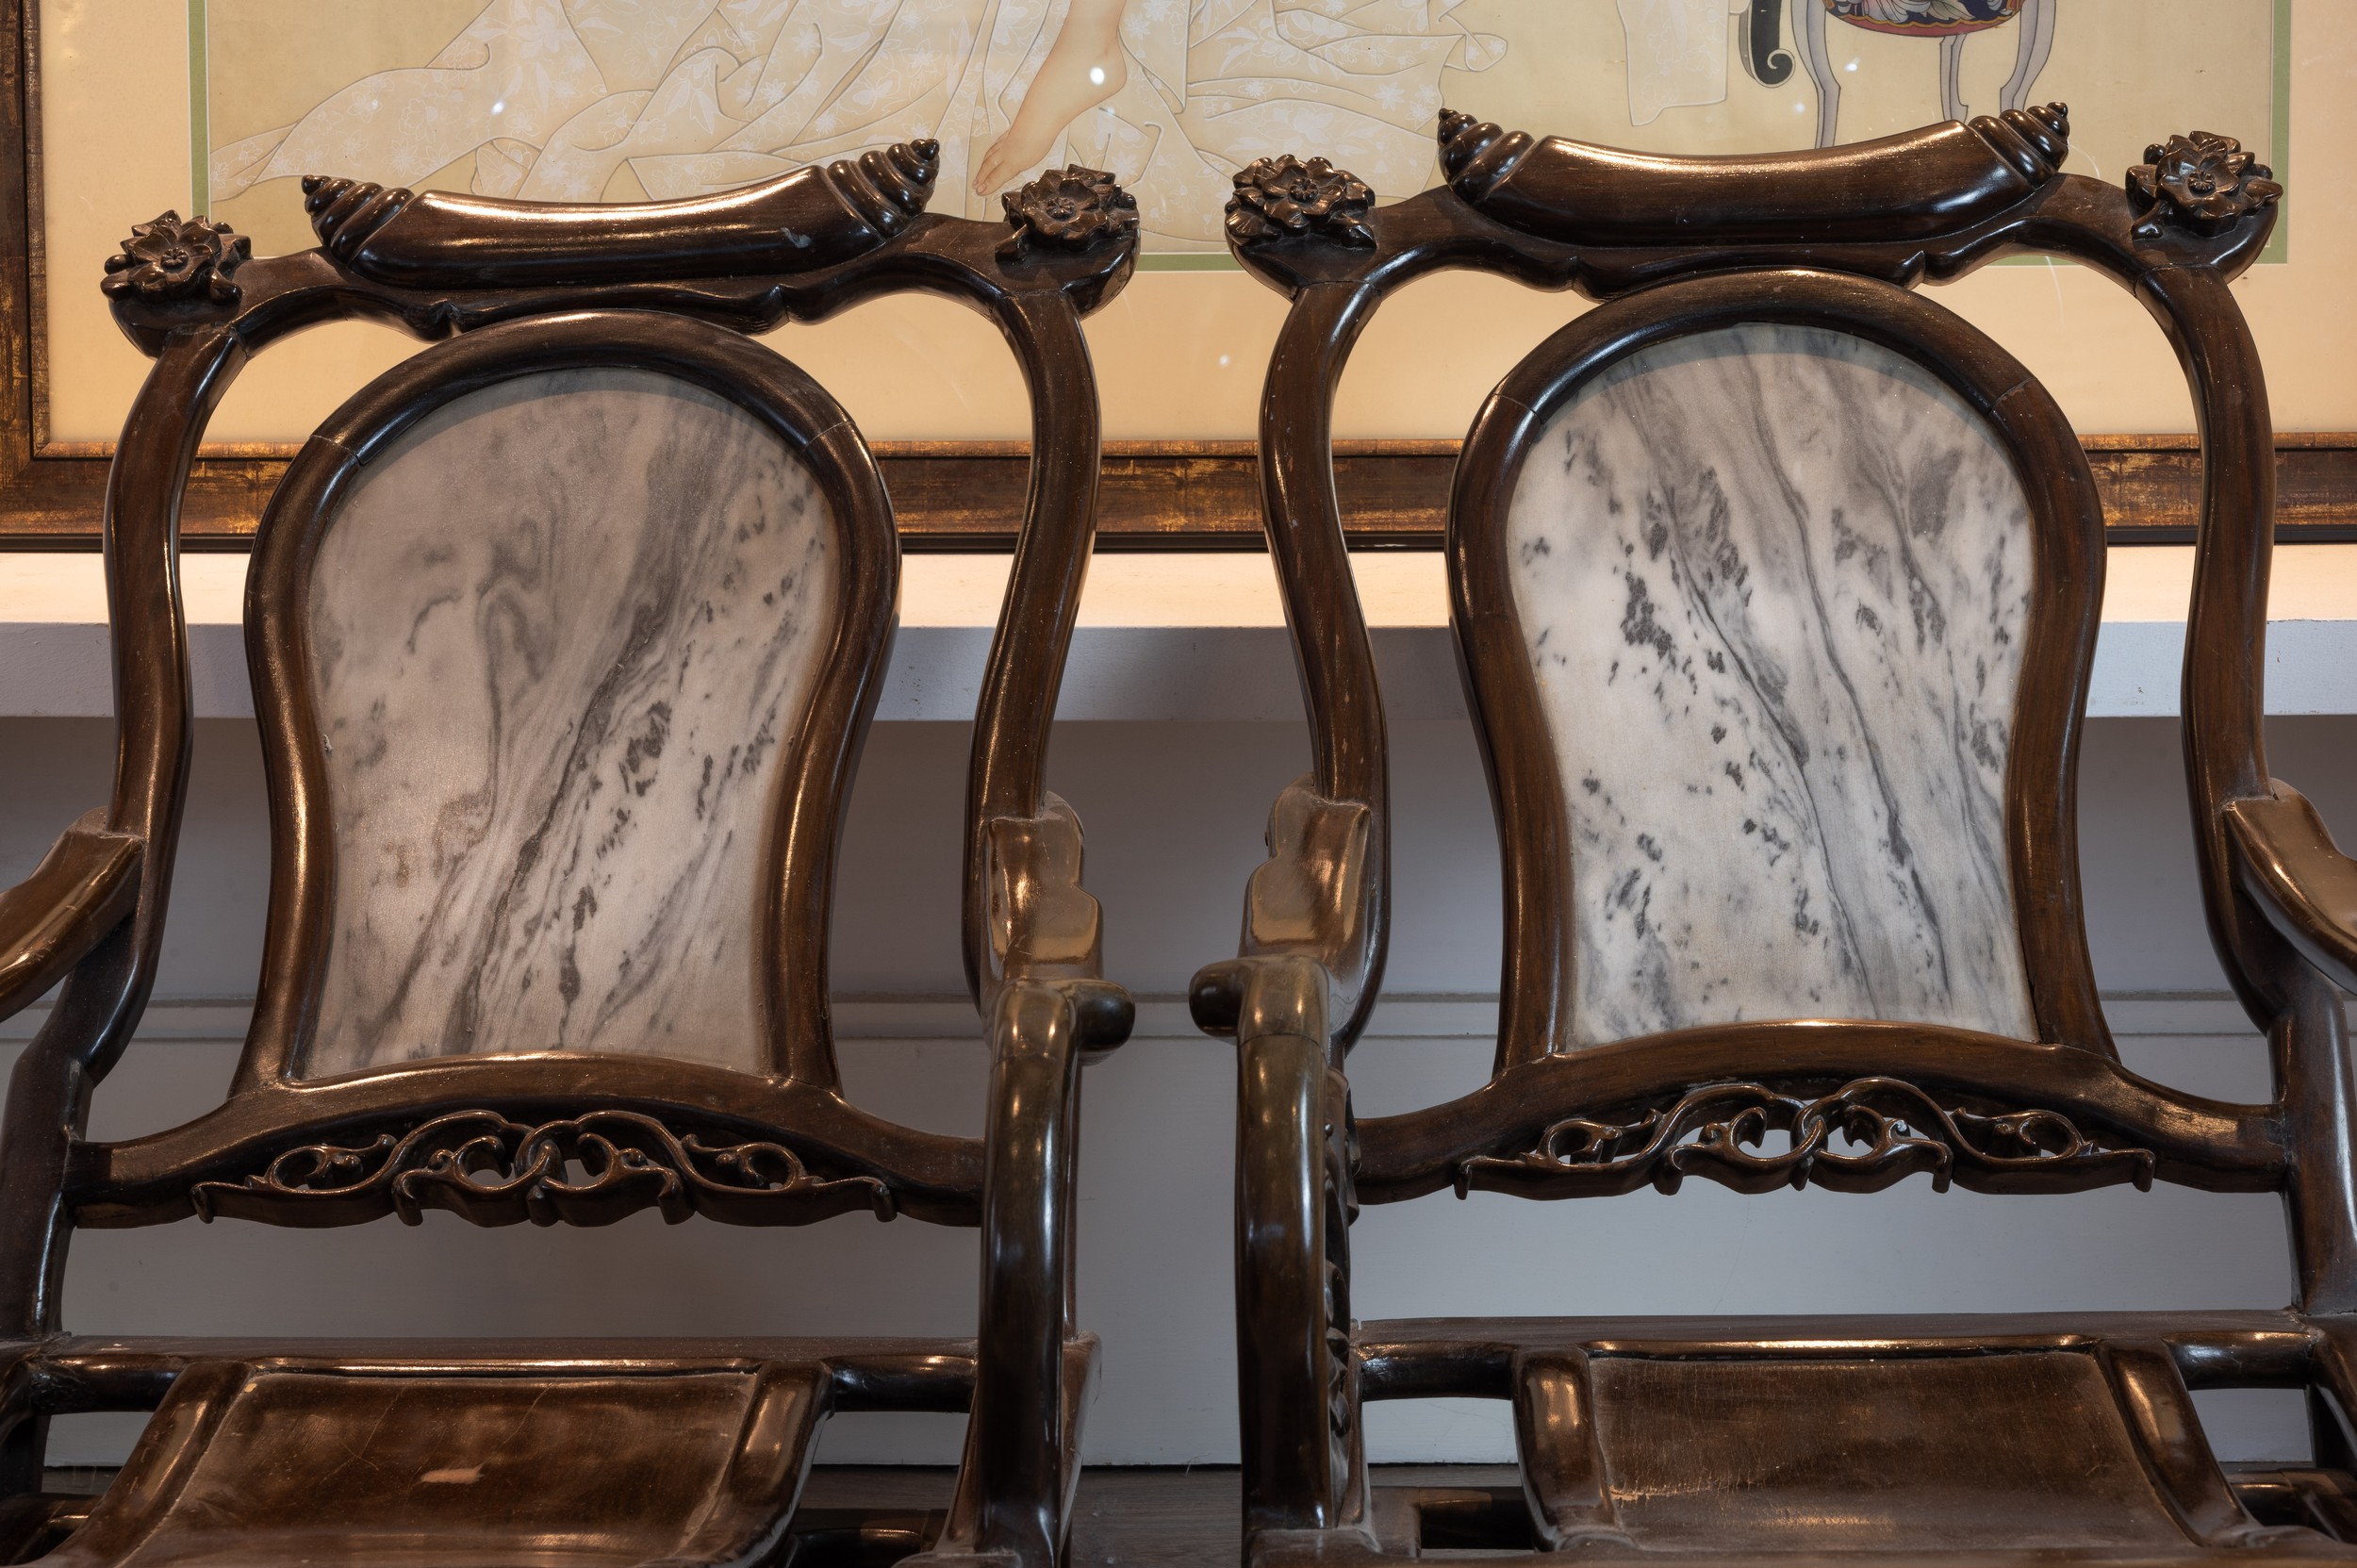 PAIR OF 20TH CENTURY CHINESE HARDWOOD 'MOON GAZING' CHAIRS, With floral carved headrests, Dali - Image 4 of 6